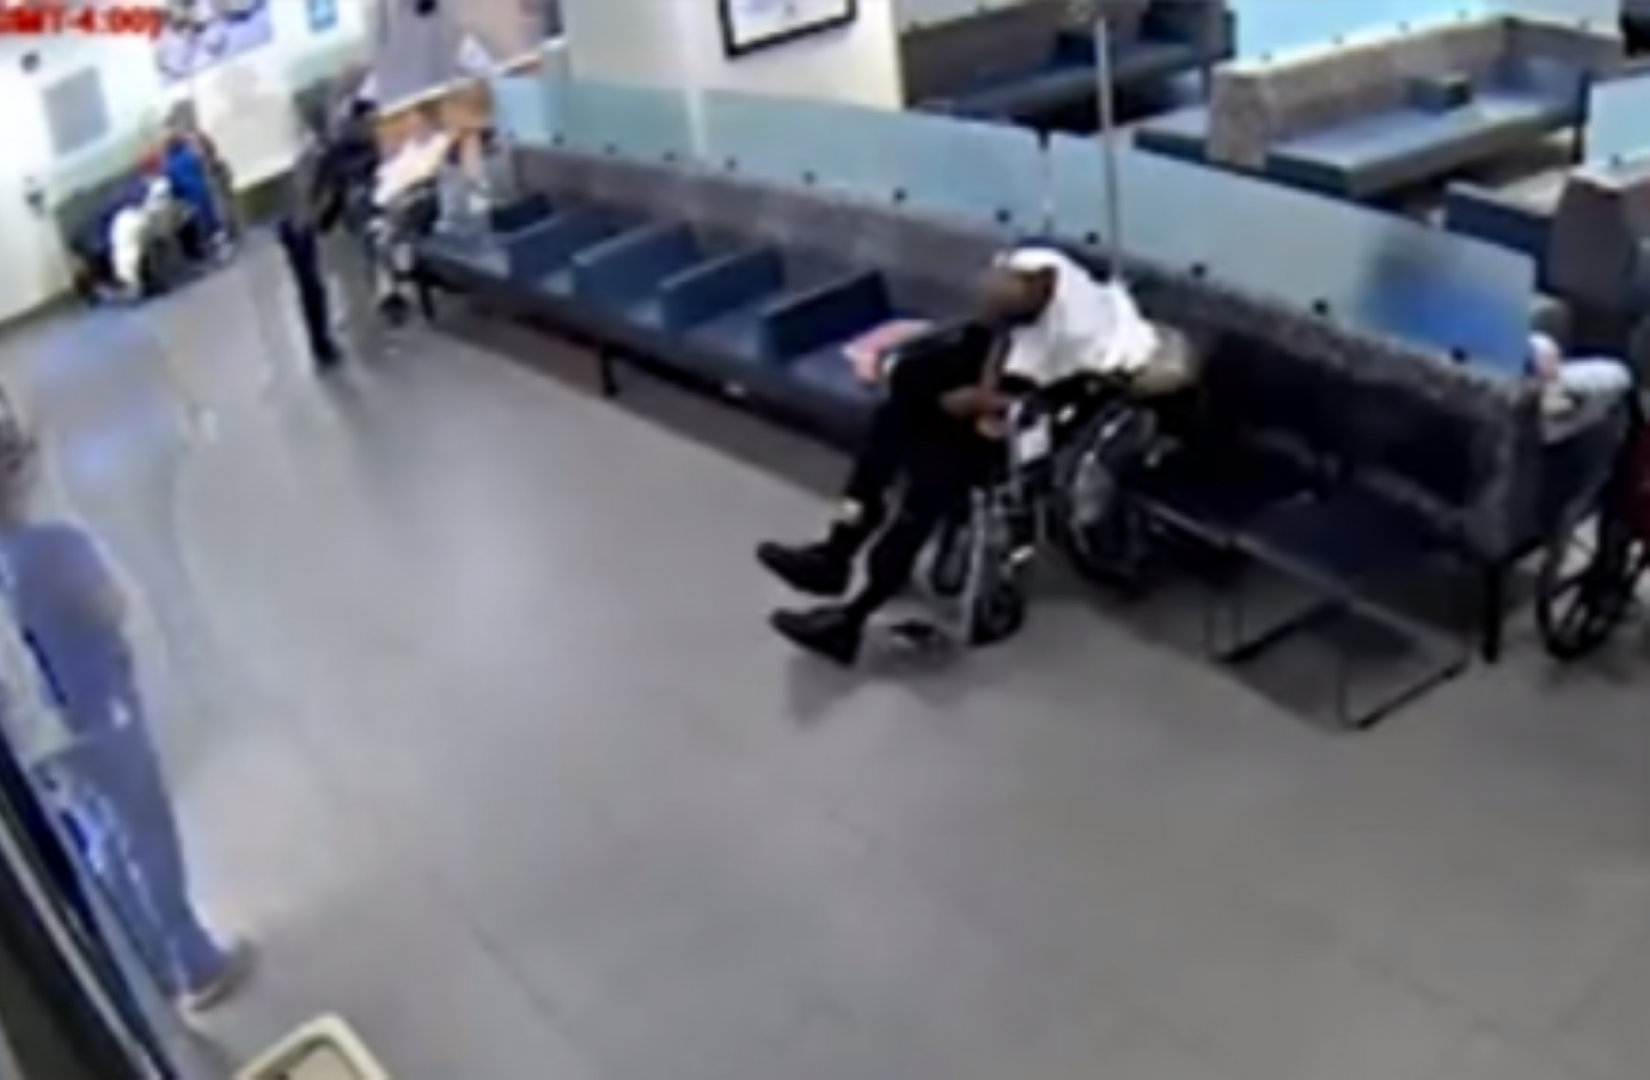 The family of Terry Lynn Odoms, 72, is suing Wellspan York Hospital because they say Odoms was left unattended in the emergency room for more than two hours in August 2019. He died soon after staff found him unresponsive. This image, from York Hospital security video and released by the law firm that filed the suit, shows Odoms alone in his wheelchair.